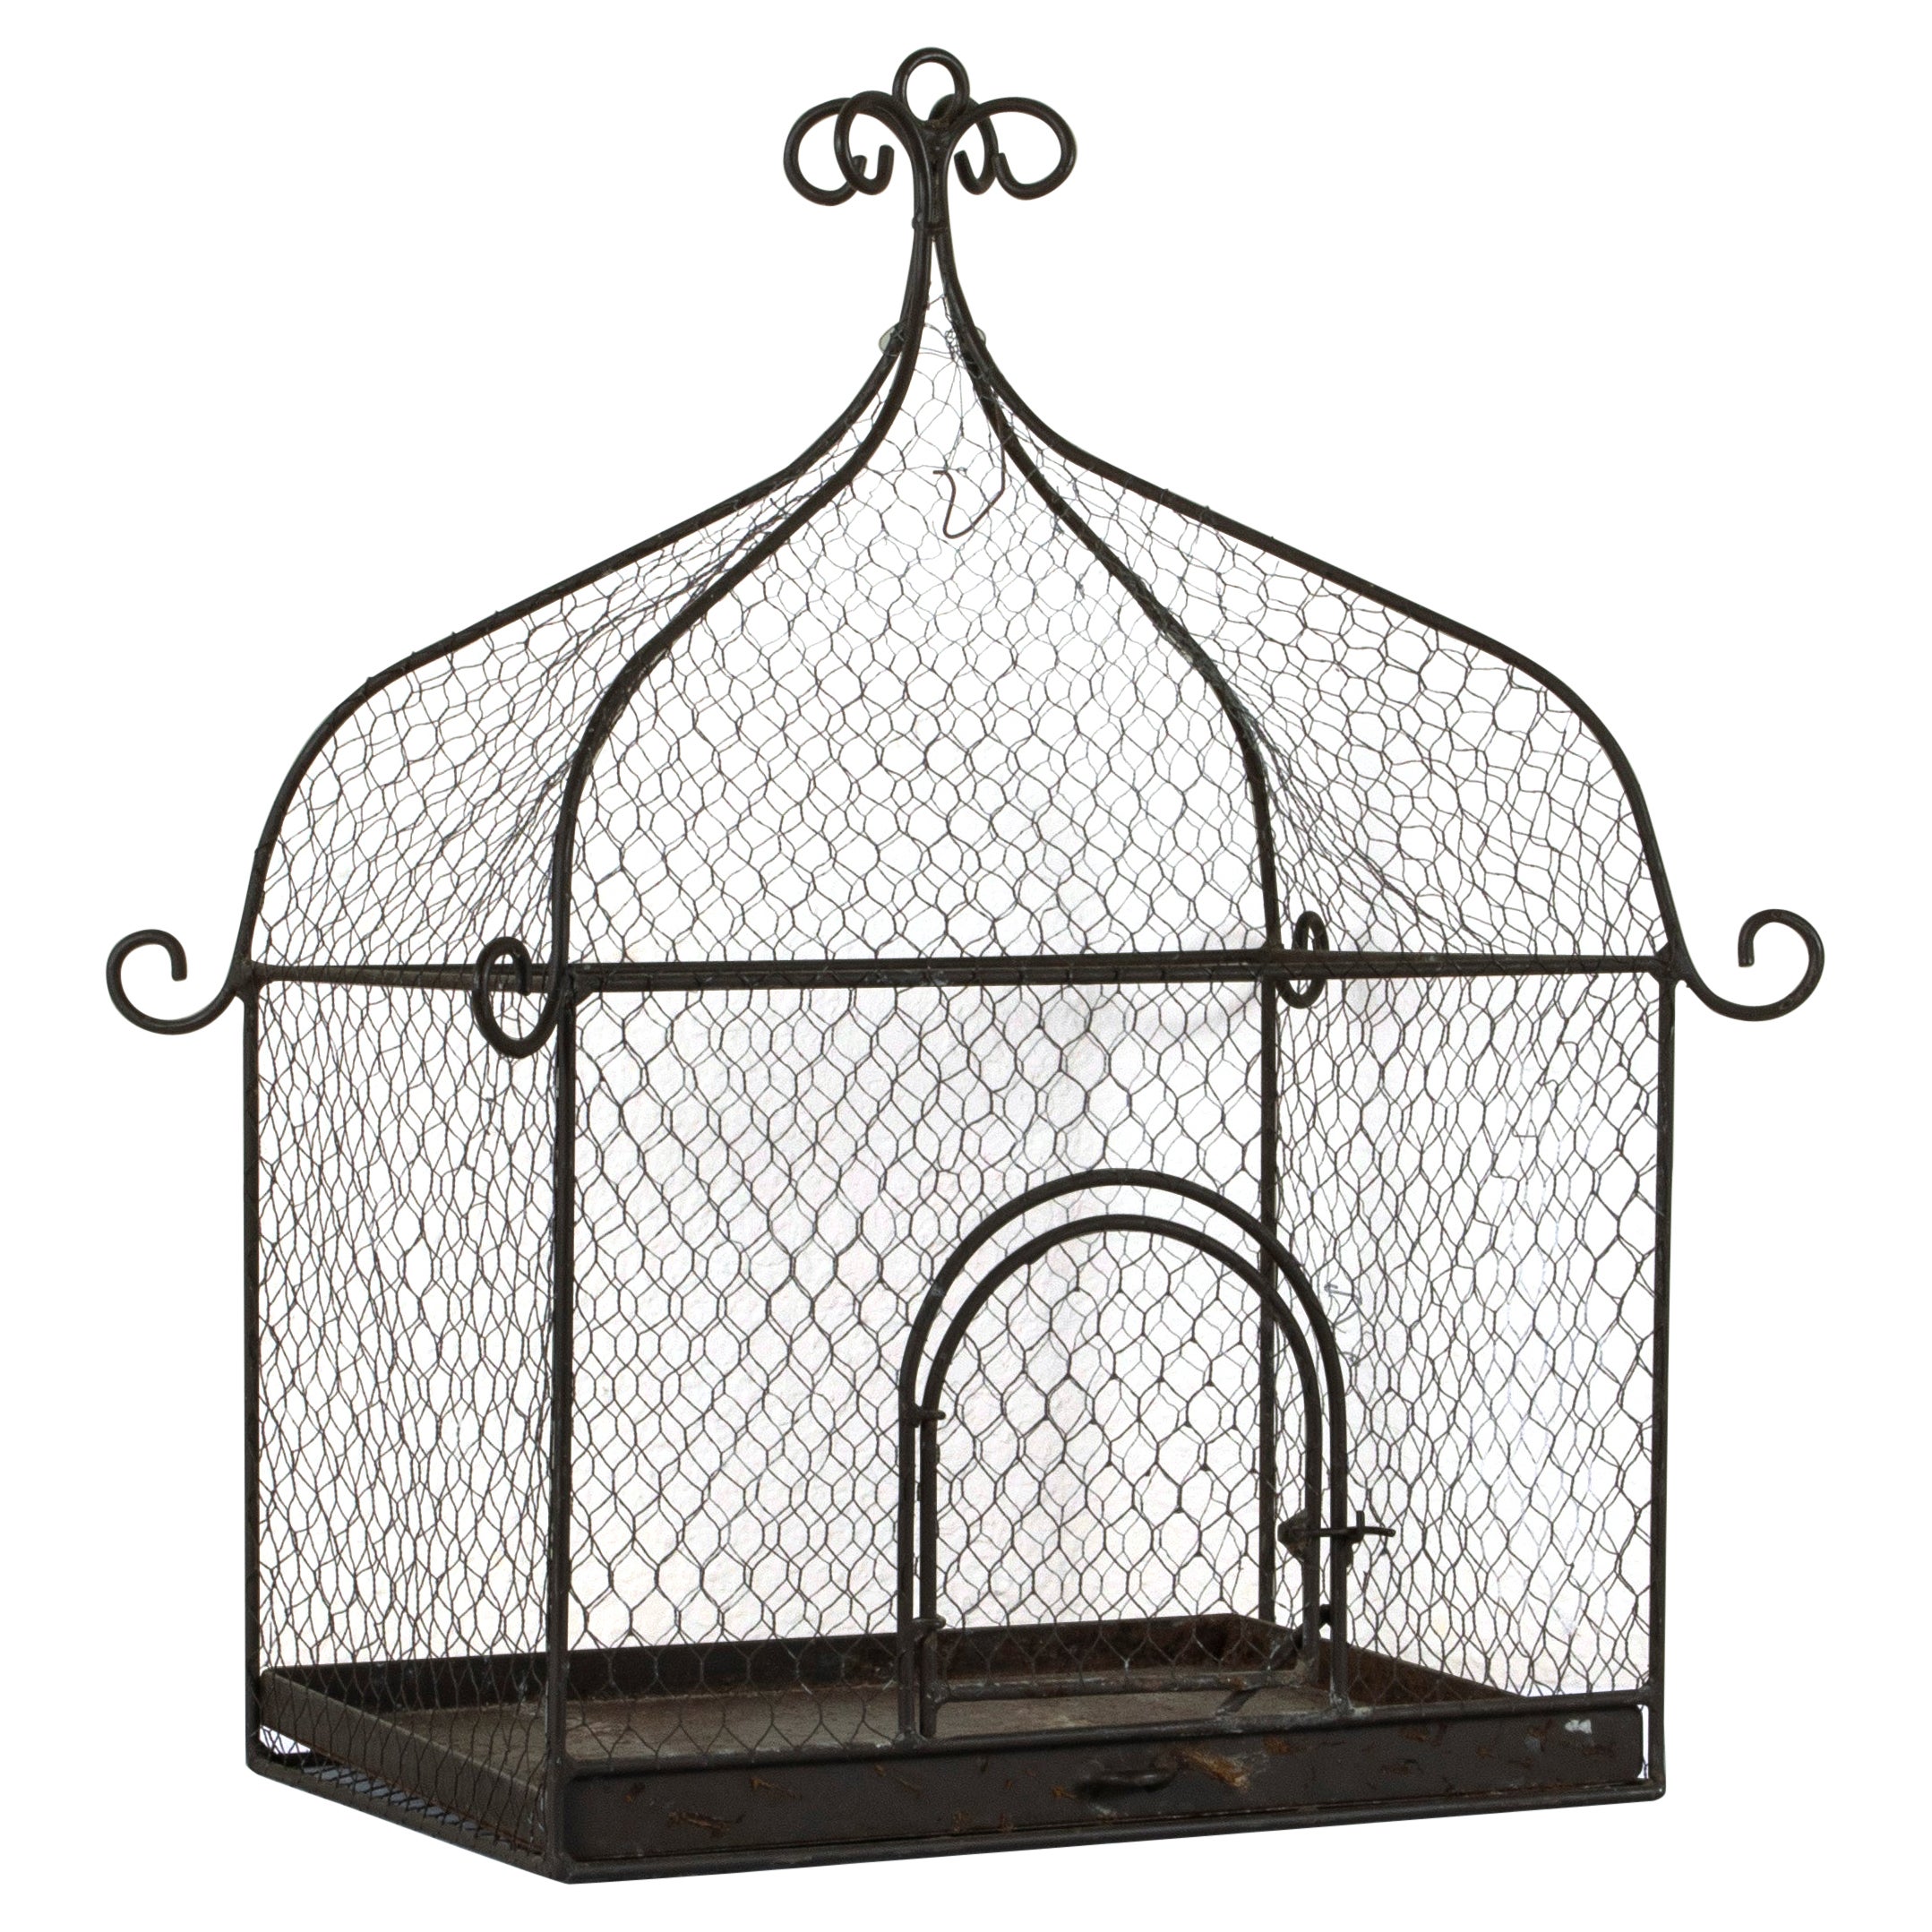 Mid-20th Century French Iron and Wire Bird Cage with Pullout Tray For Sale